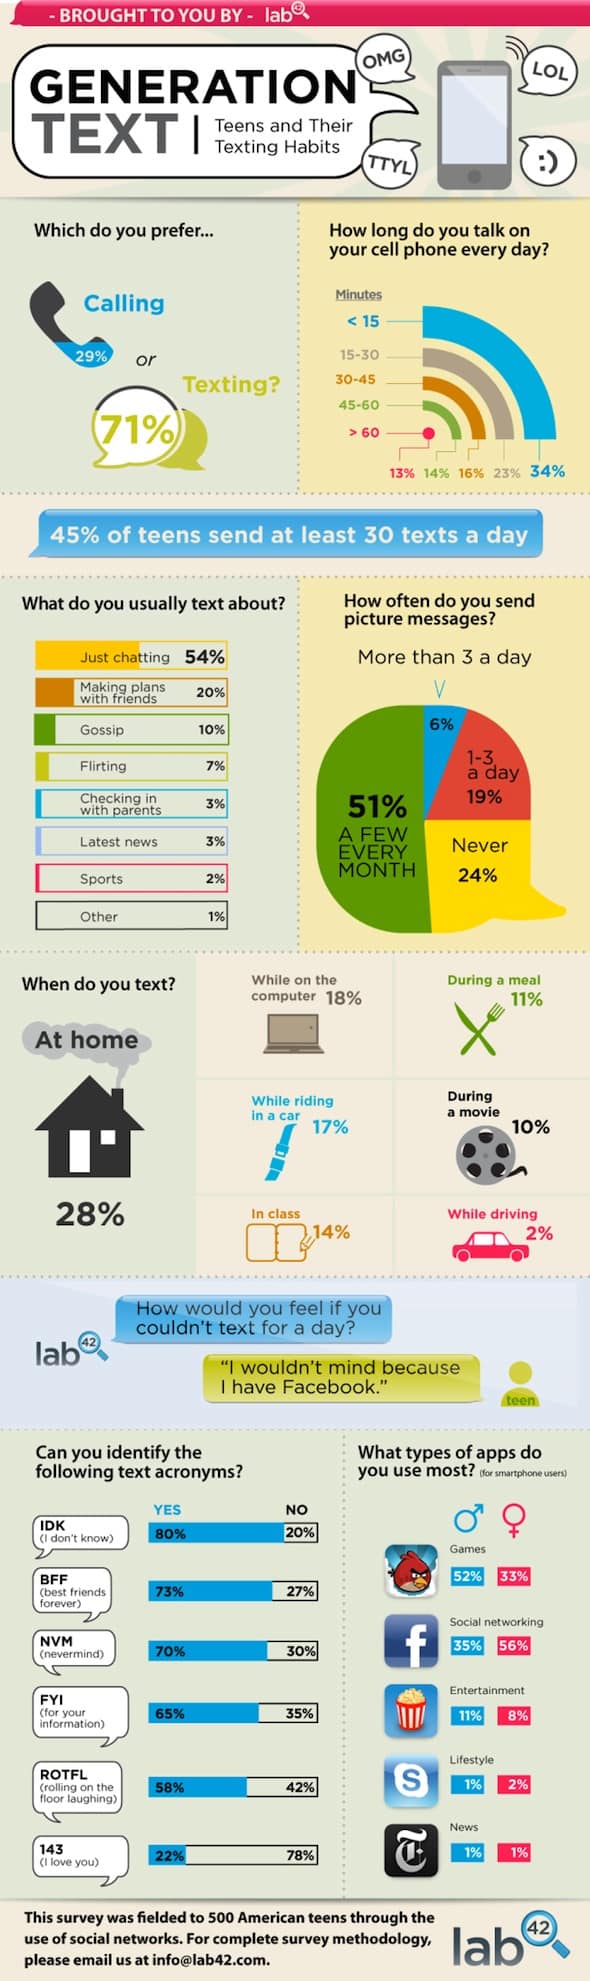 Generation Text Messaging Infographic